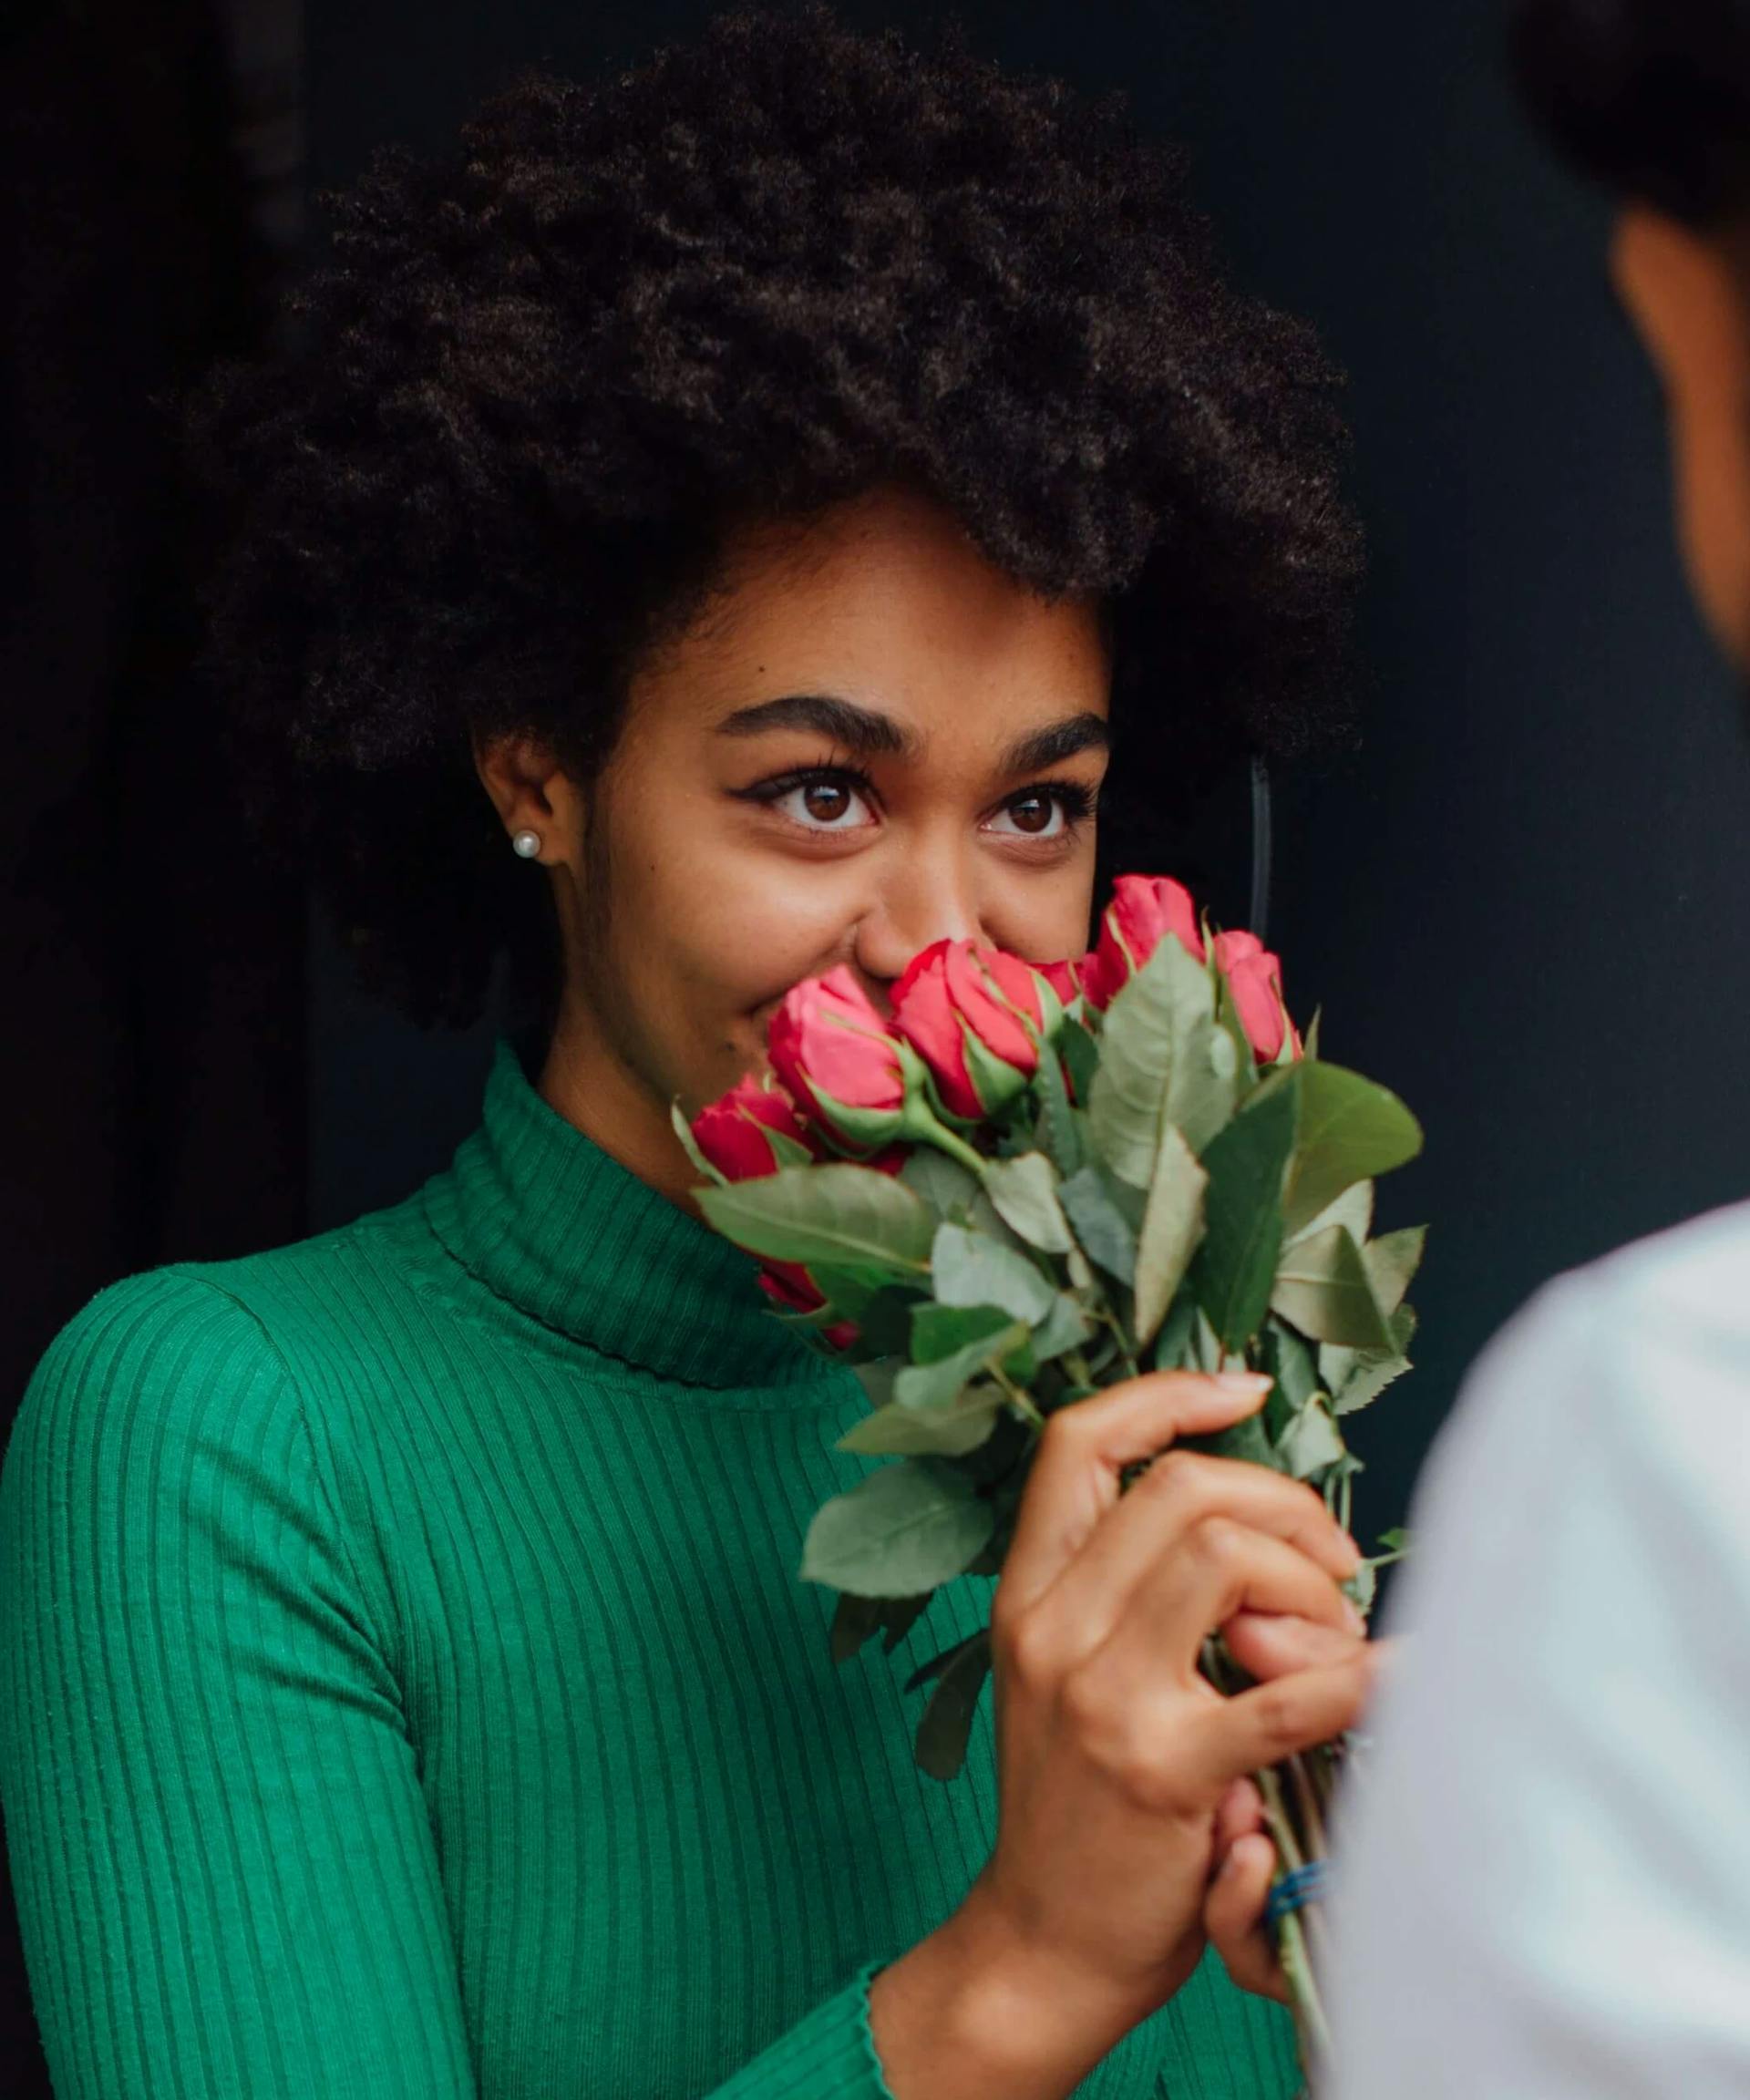 5 Etiquette Tips To Always Make A Good First Impression On A First Date